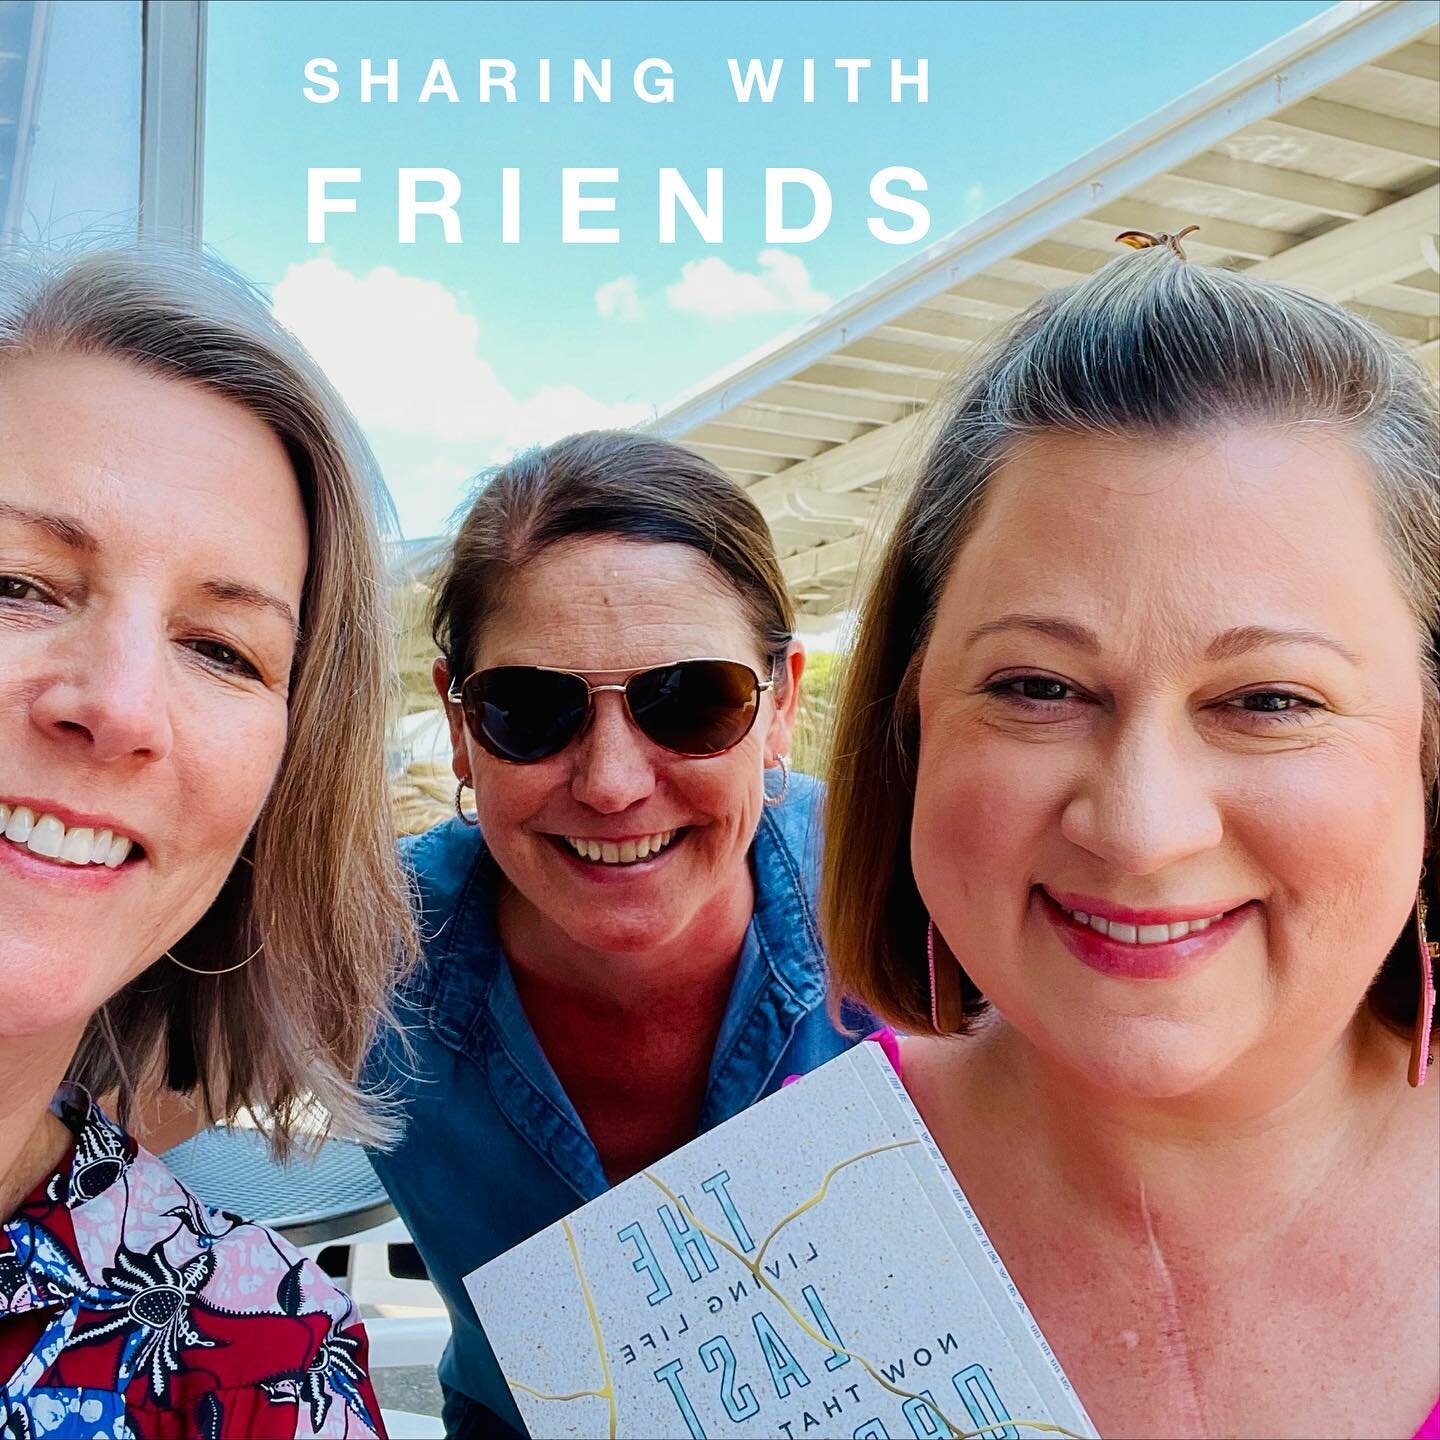 Made my day to get this text from Raleigh friend Graham Satisky @grahamsatisky and Jackie Craig @jackiecraig 

&ldquo;Jackie and I took our friend , Molly Anderson, to lunch today and gave her a copy of your book.&ldquo;

Molly had an aneurysm two ye